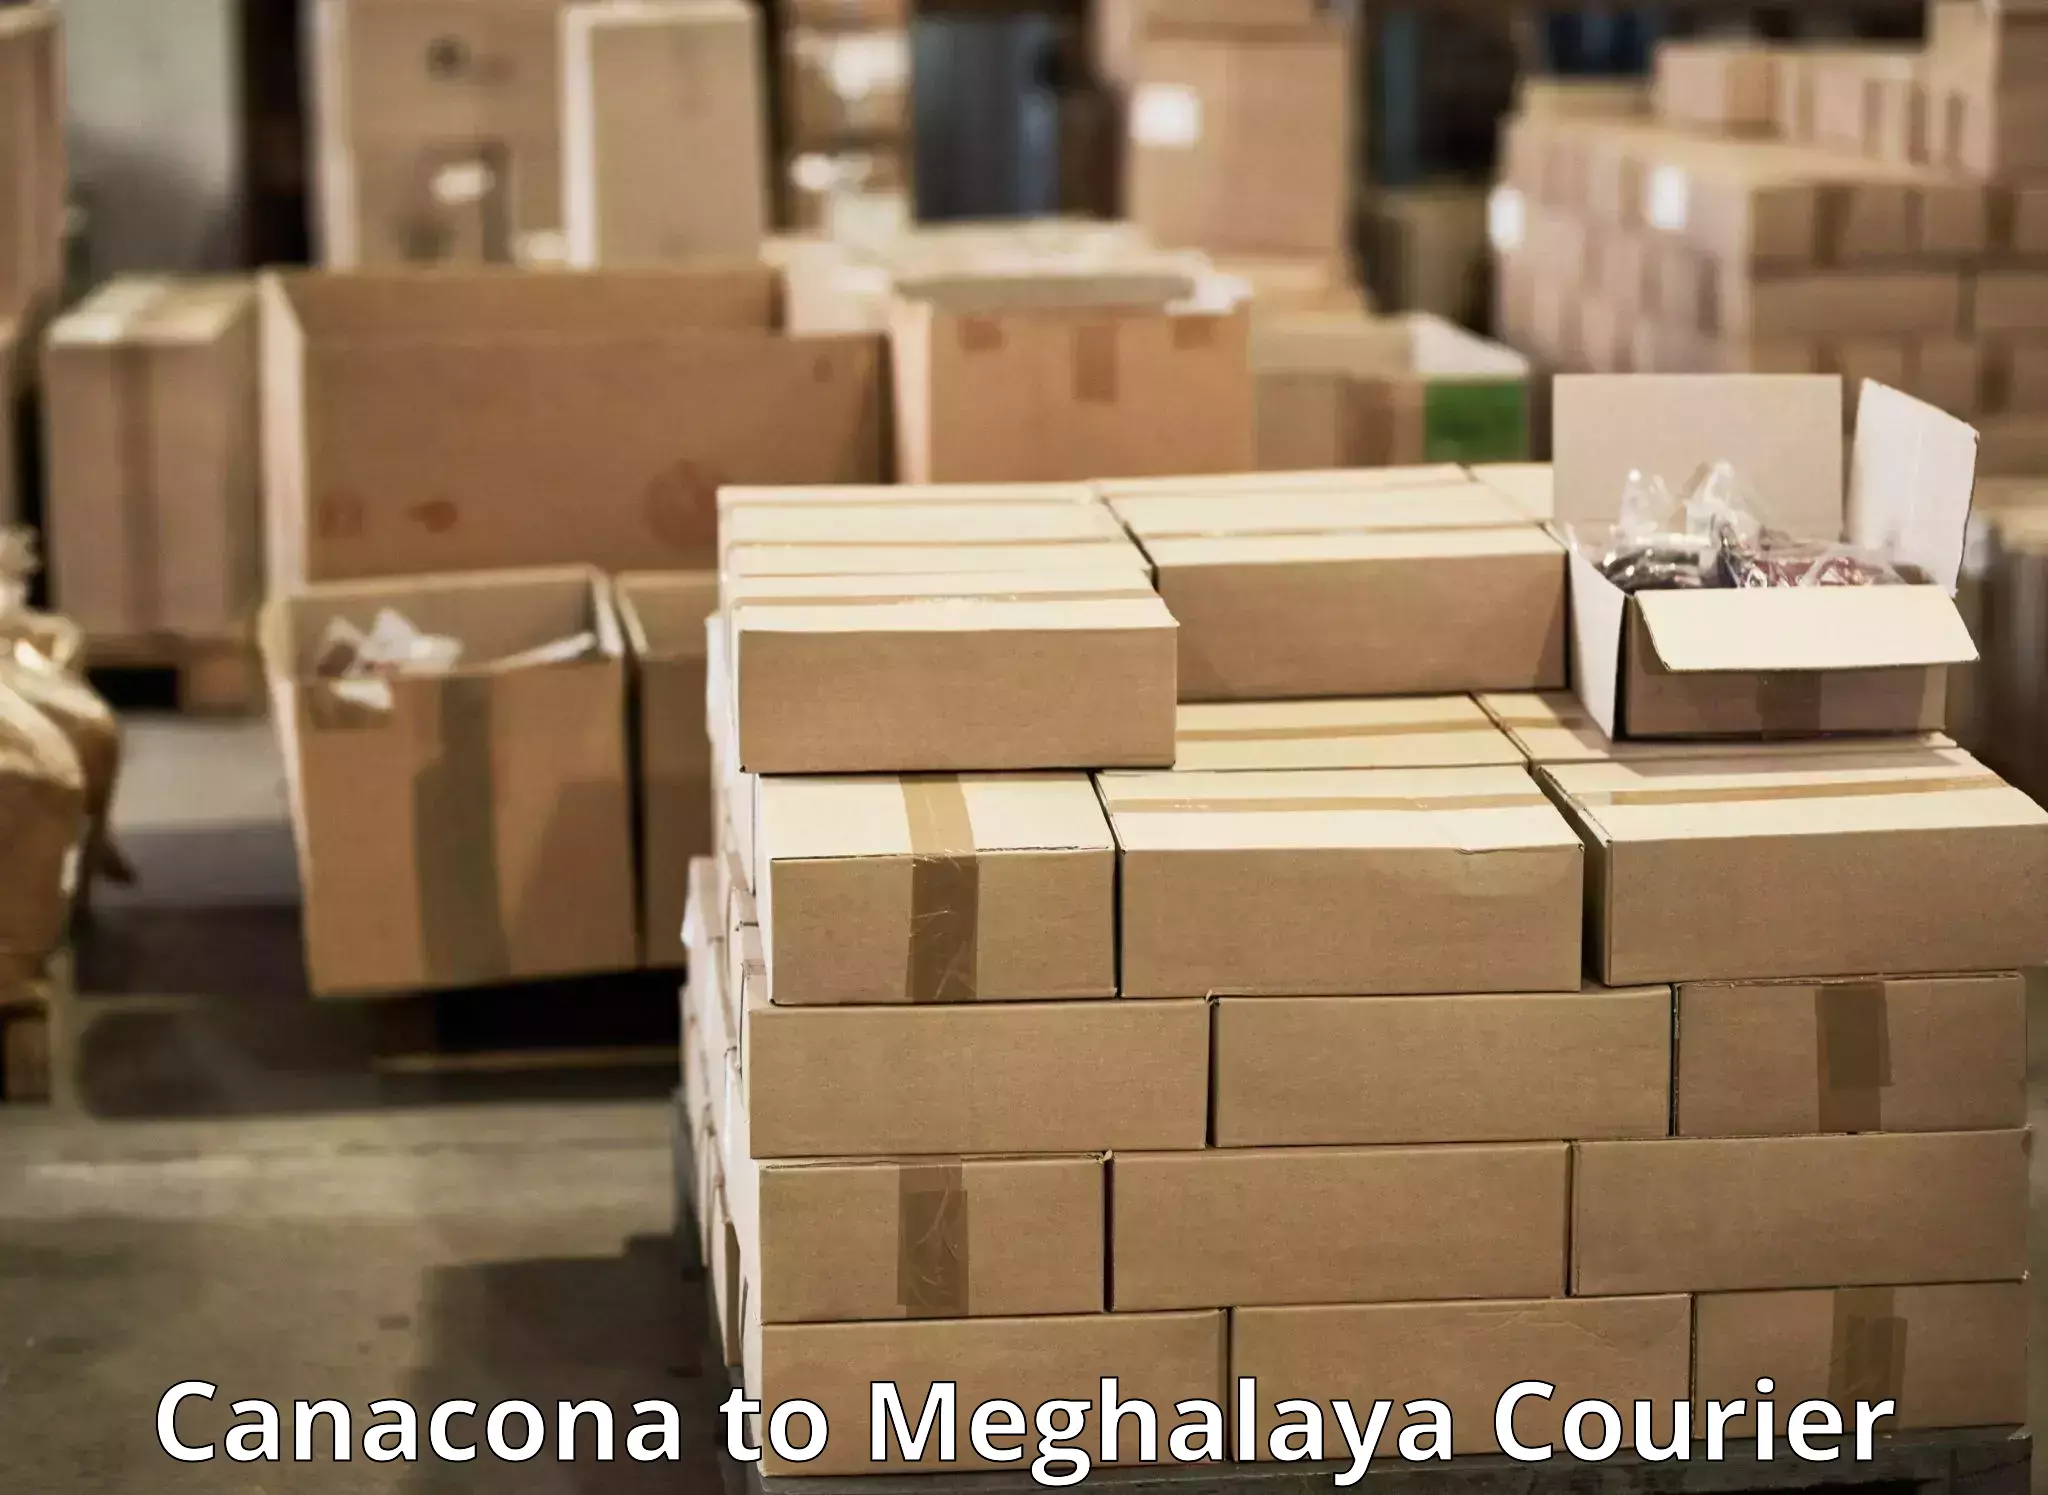 Comprehensive parcel tracking in Canacona to Tura